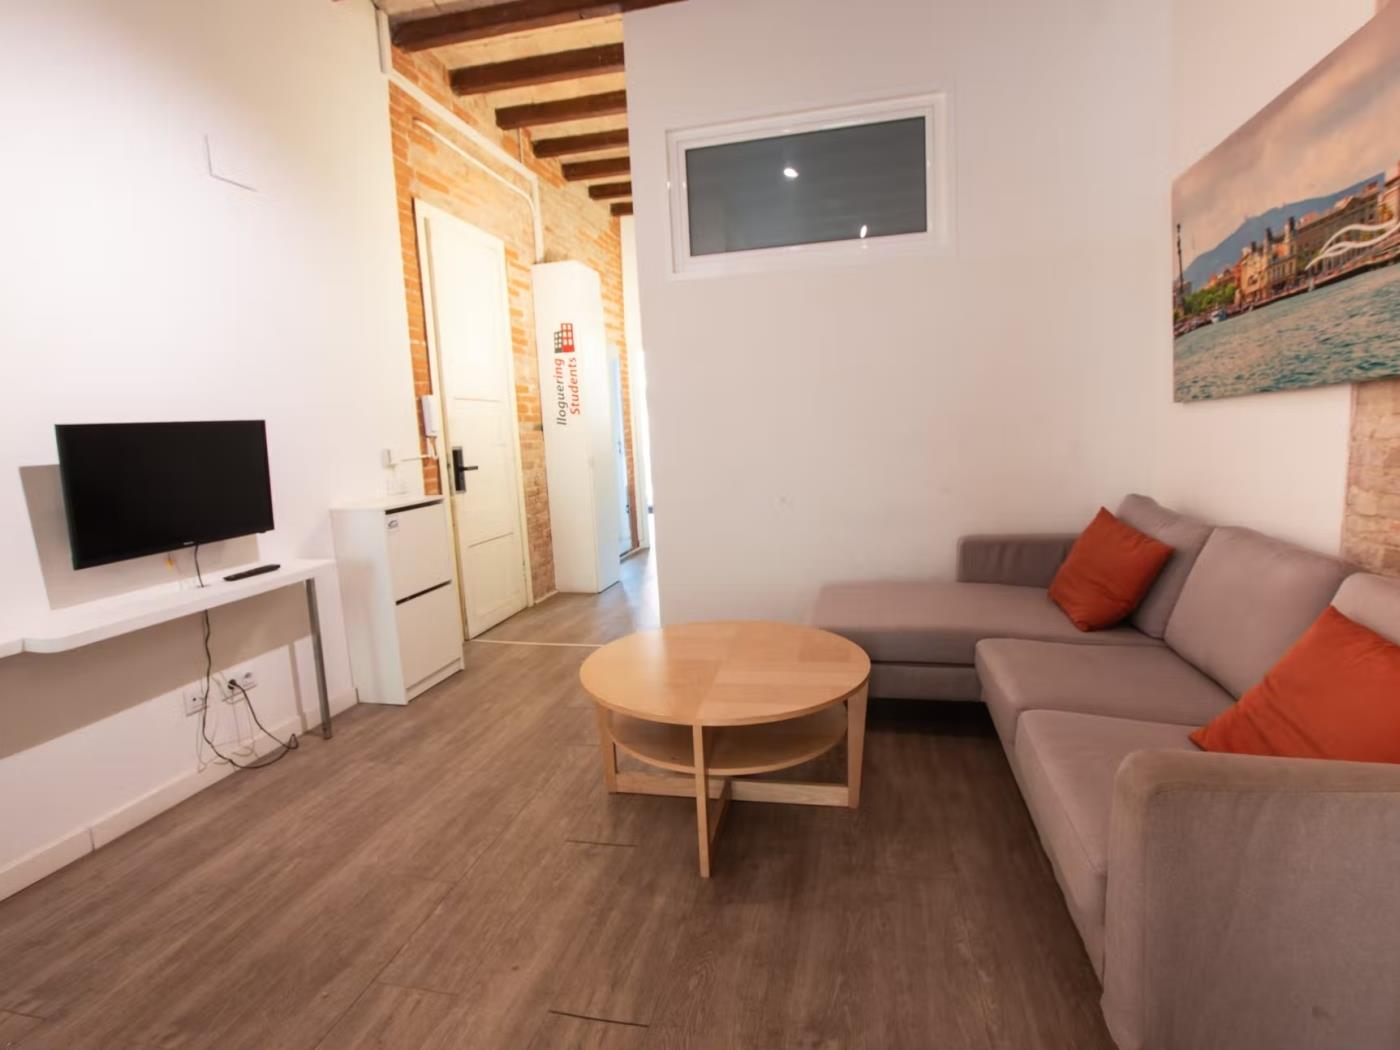 Room in a shared apartment of 4 bedrooms in Gràcia - My Space Barcelona Apartments